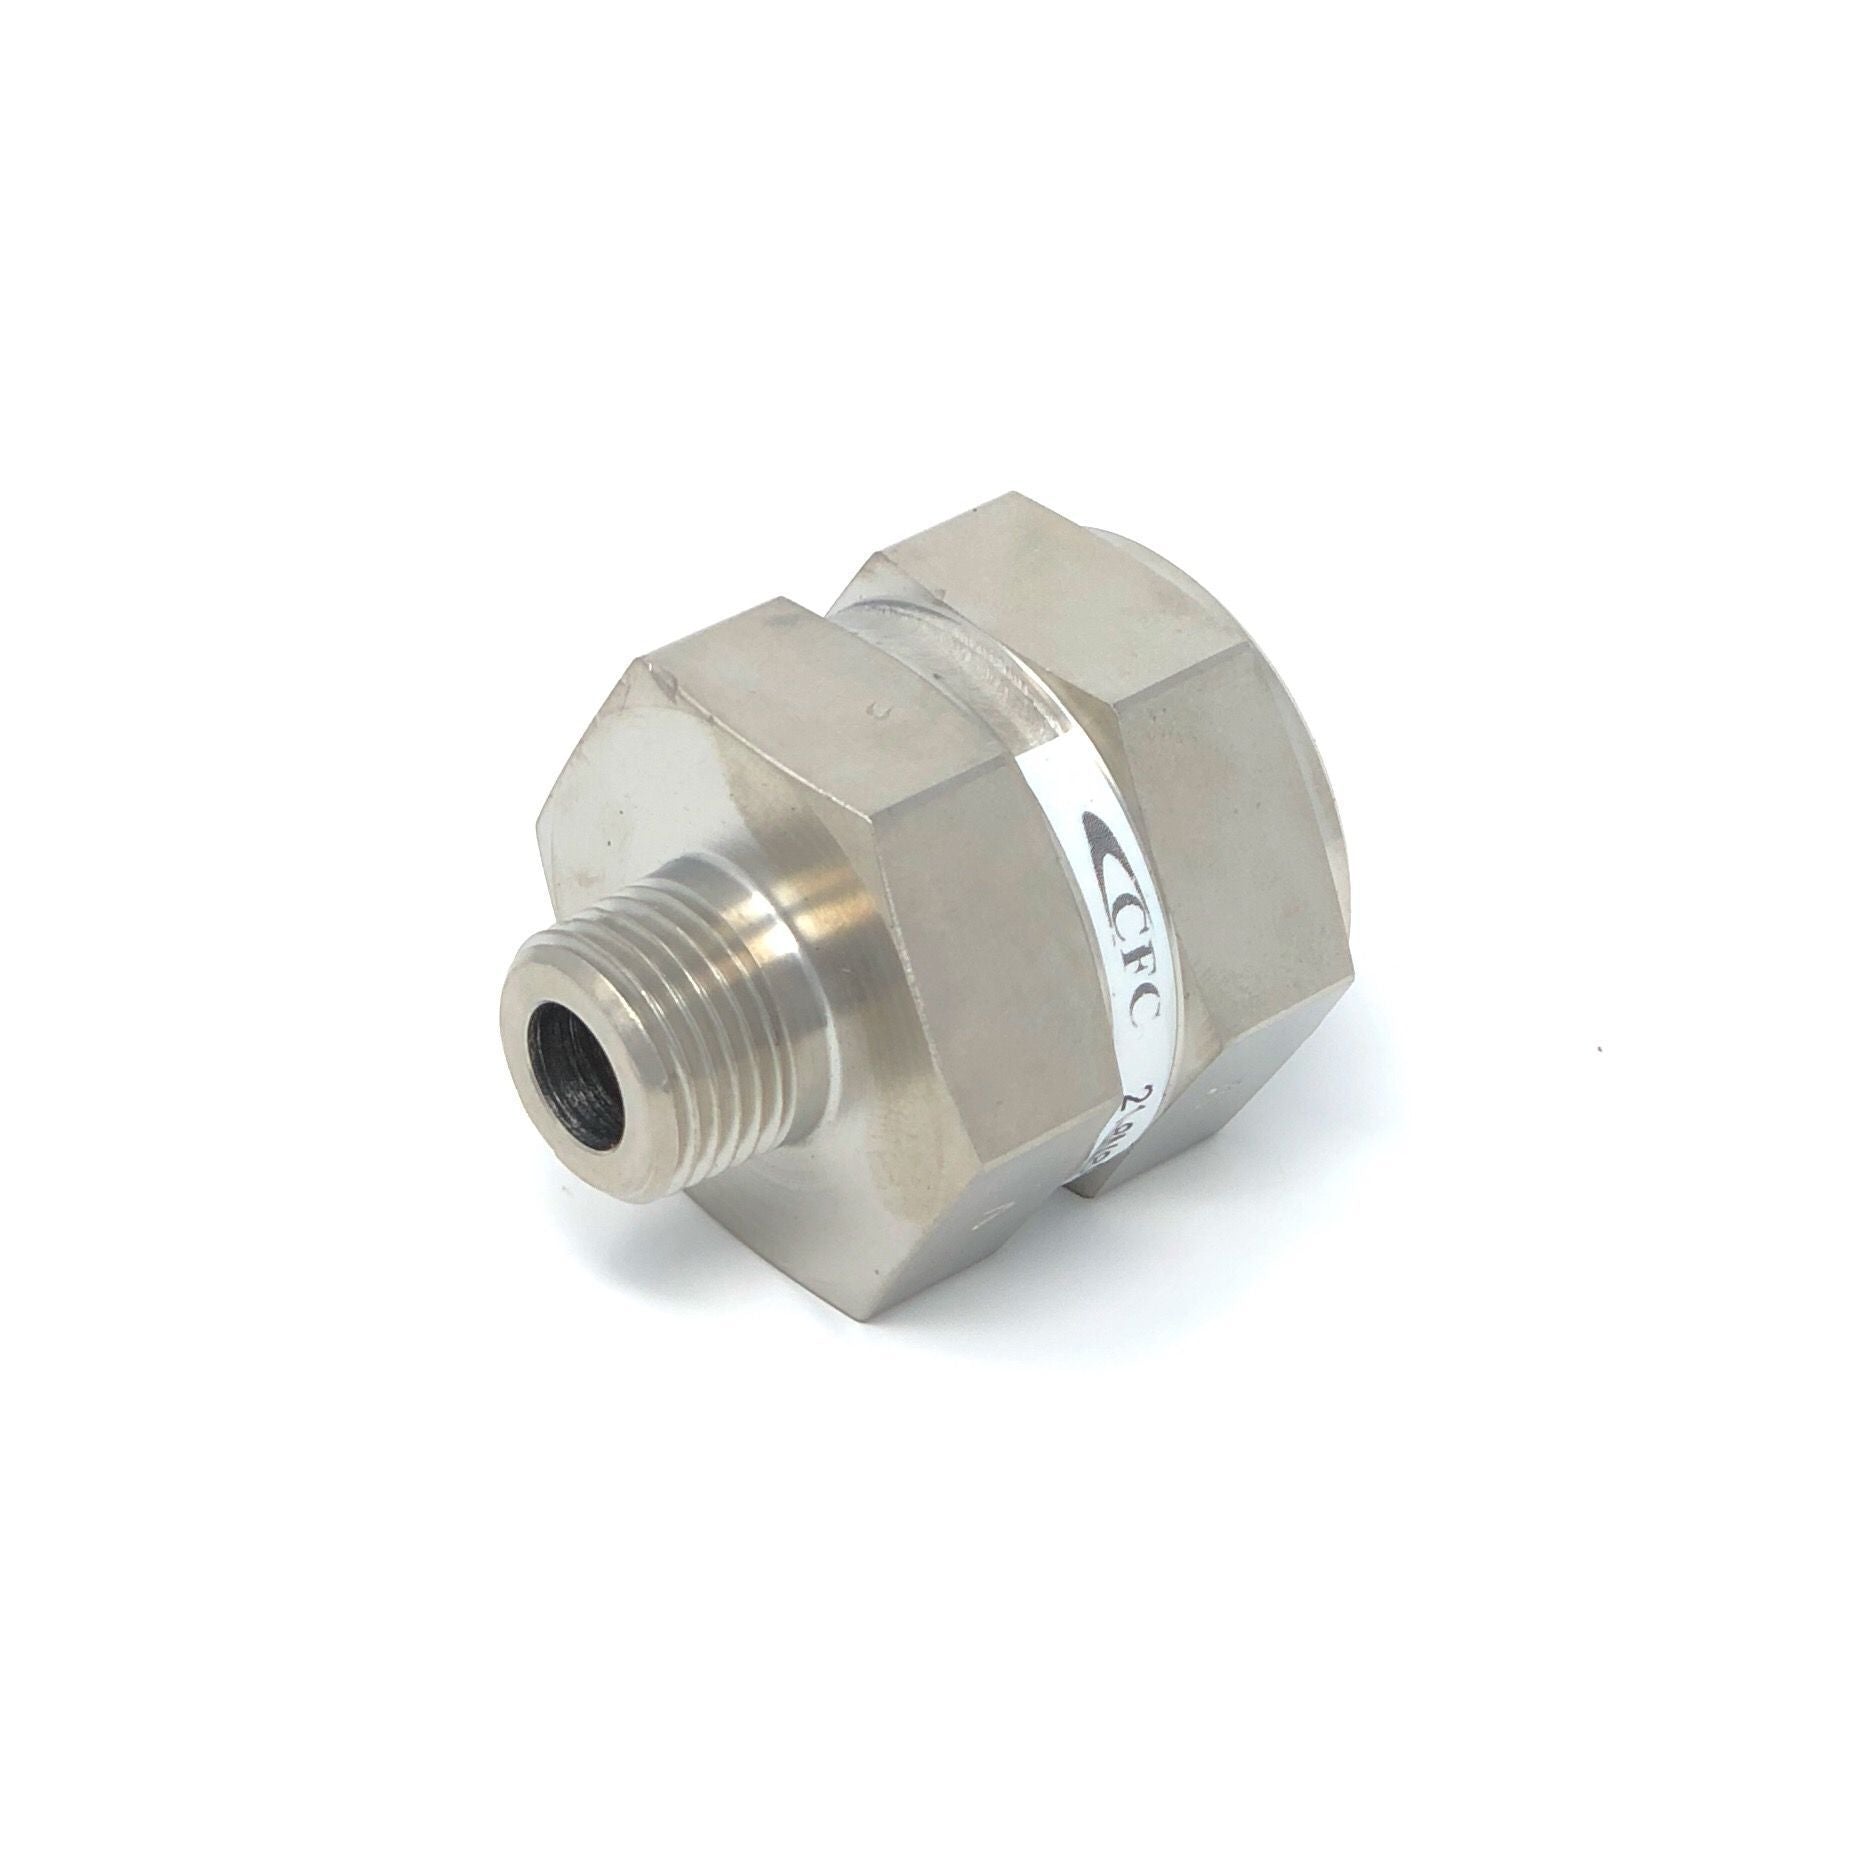 21-4N4N-100S : Chase High Pressure Inline Filter, 6000psi, 1/4" NPT, 100 Micron, No Visual Indicator, No Bypass